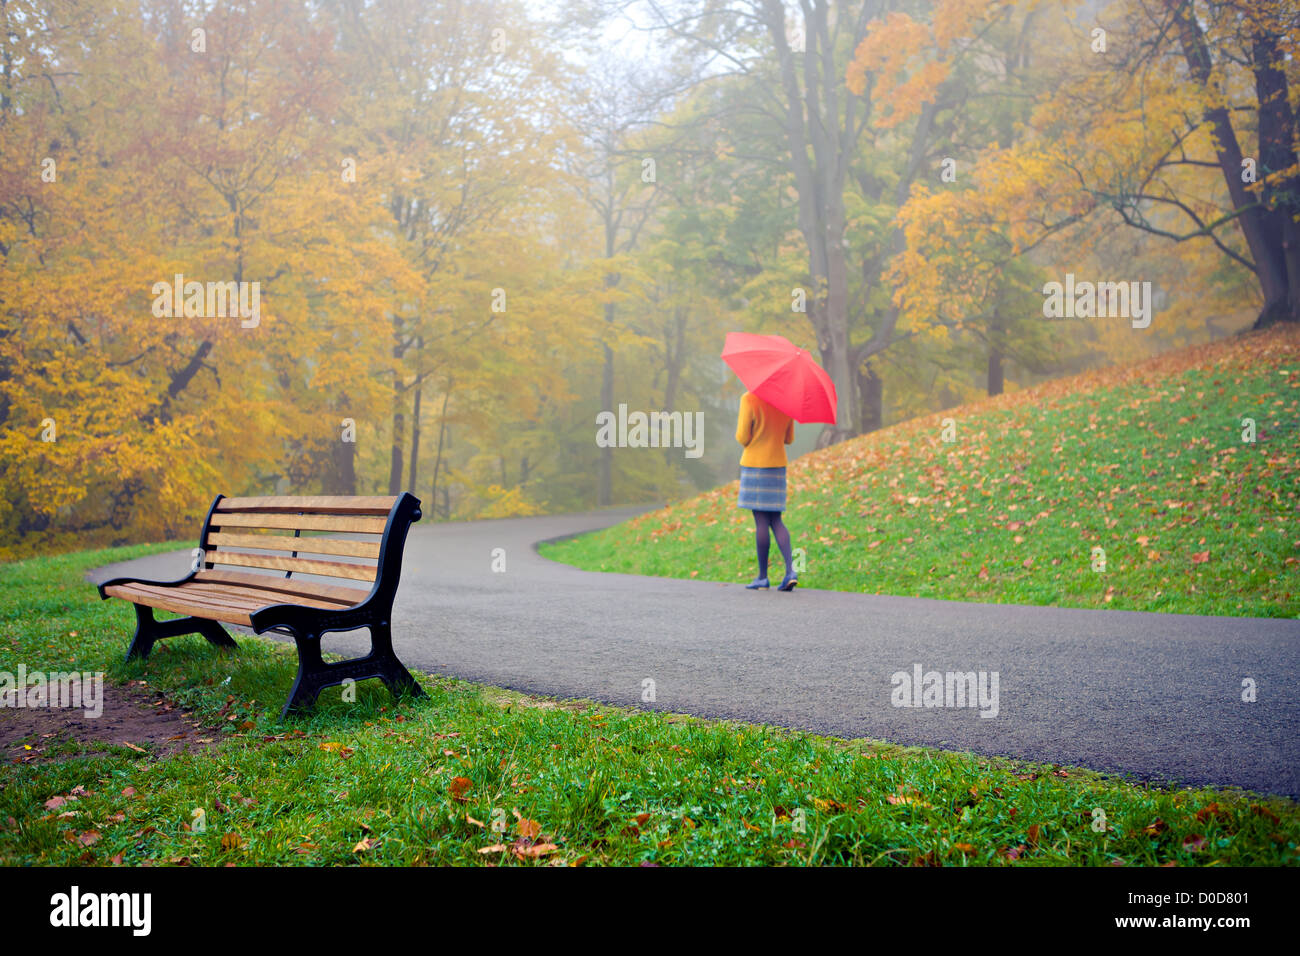 Old park in fall. Germany, Europe Stock Photo